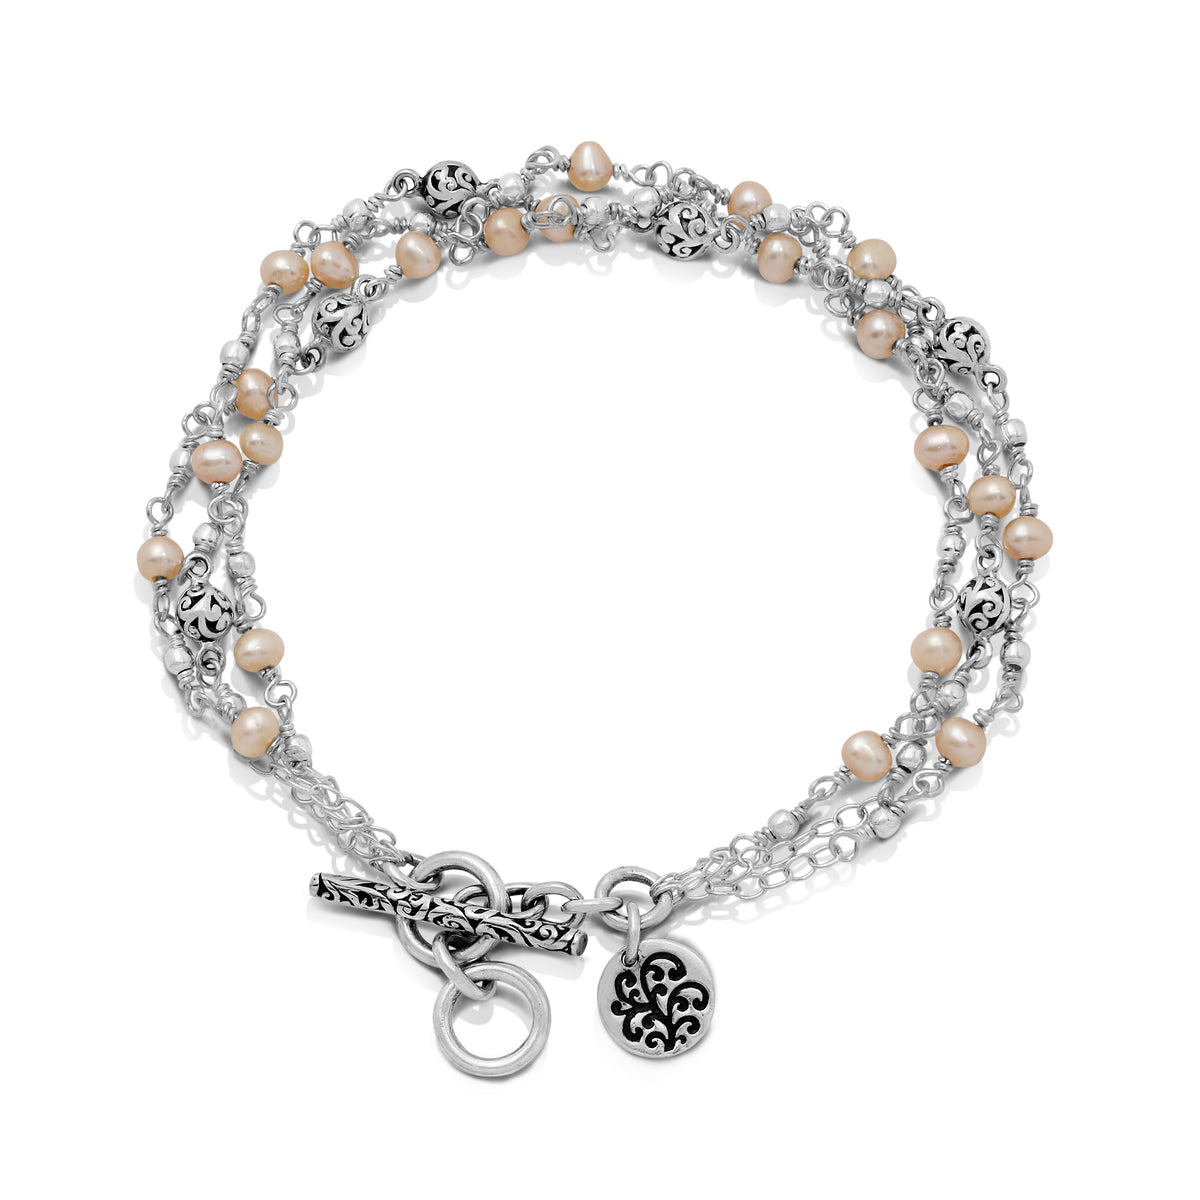 Peach Pearl (3mm) Beads with LH Scroll Bead Triple Strand with Scroll Toggle Bracelet